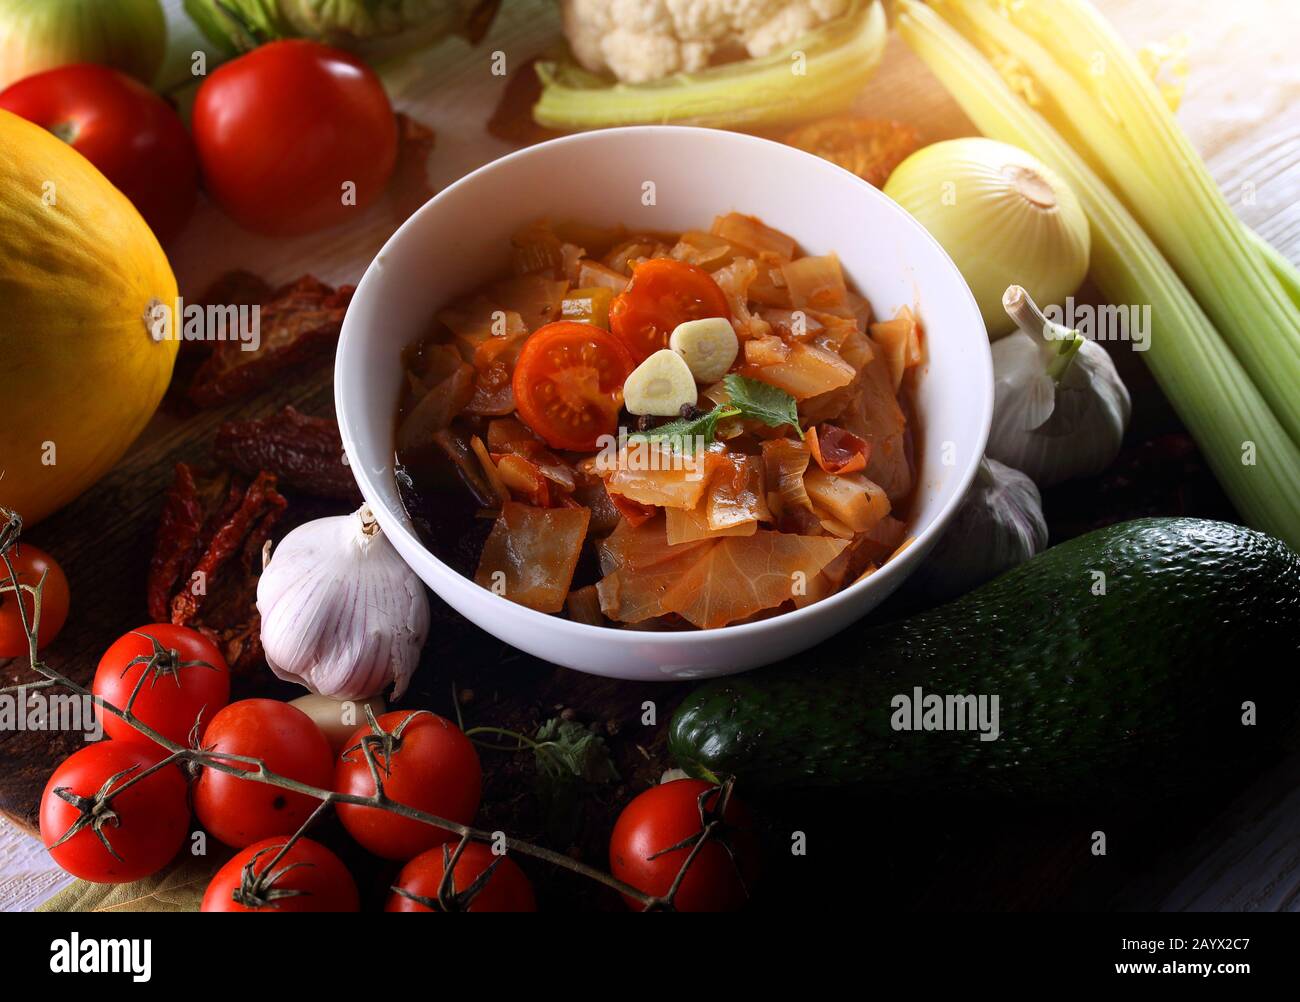 healthy and light vegetable soup Stock Photo